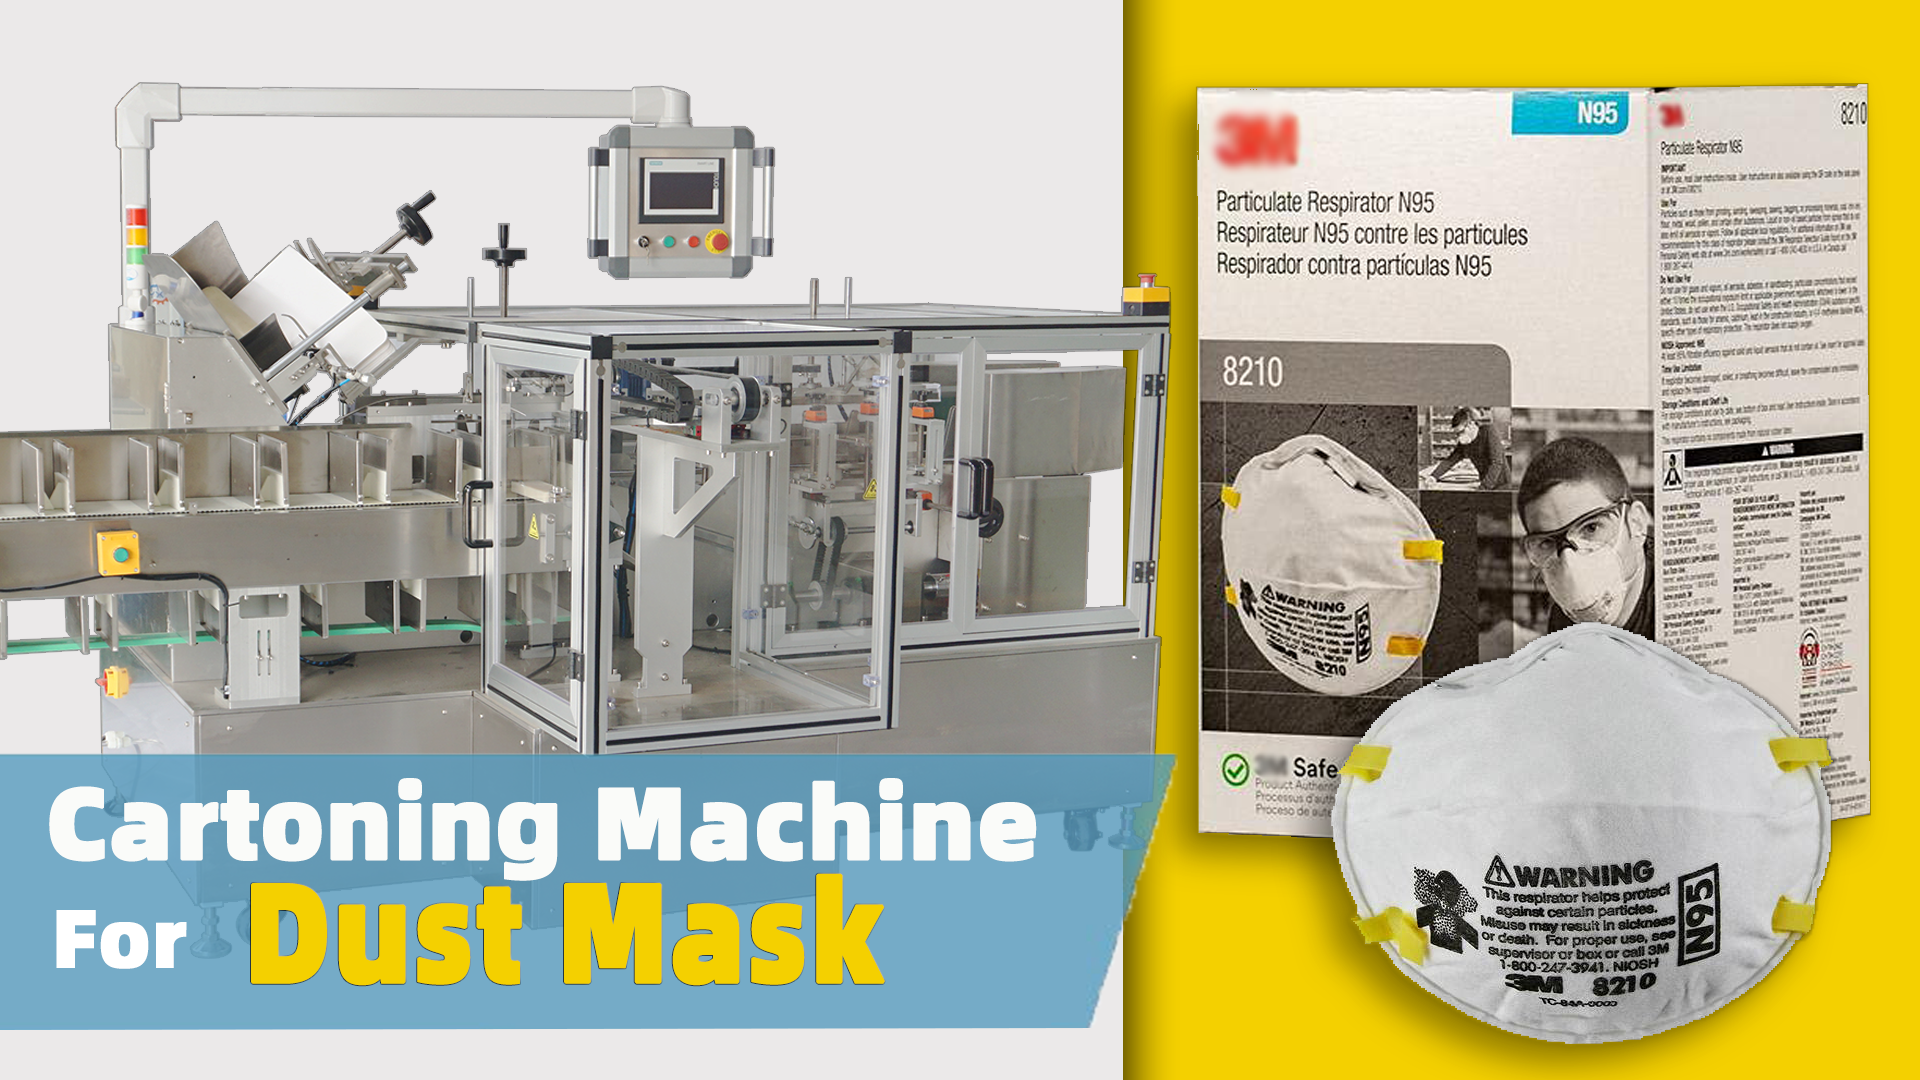 2022 Automatic Cartoning Machine for Full Face 3m Dust Mask ffp3 n95